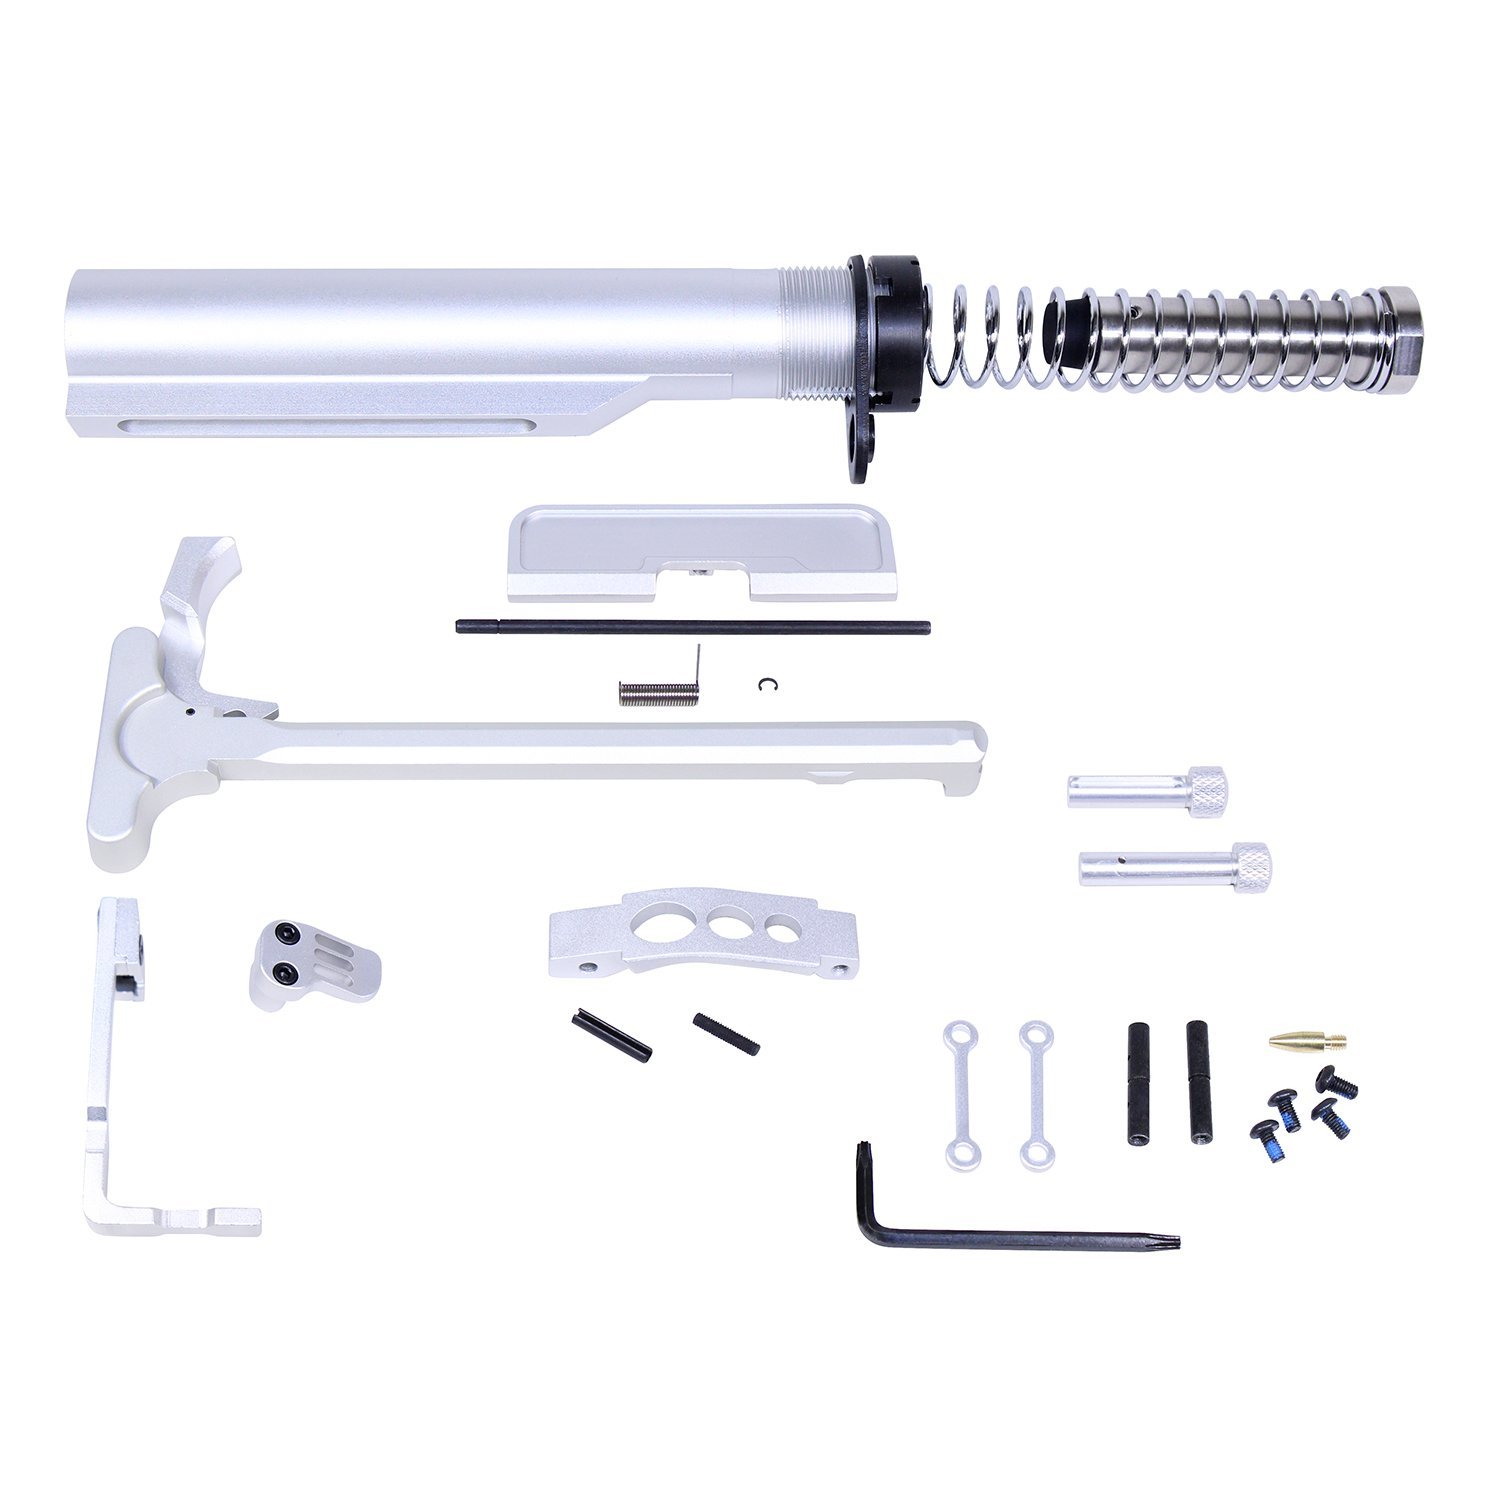 AR-15 Complete Accessory Kit in Anodized Clear Aluminum